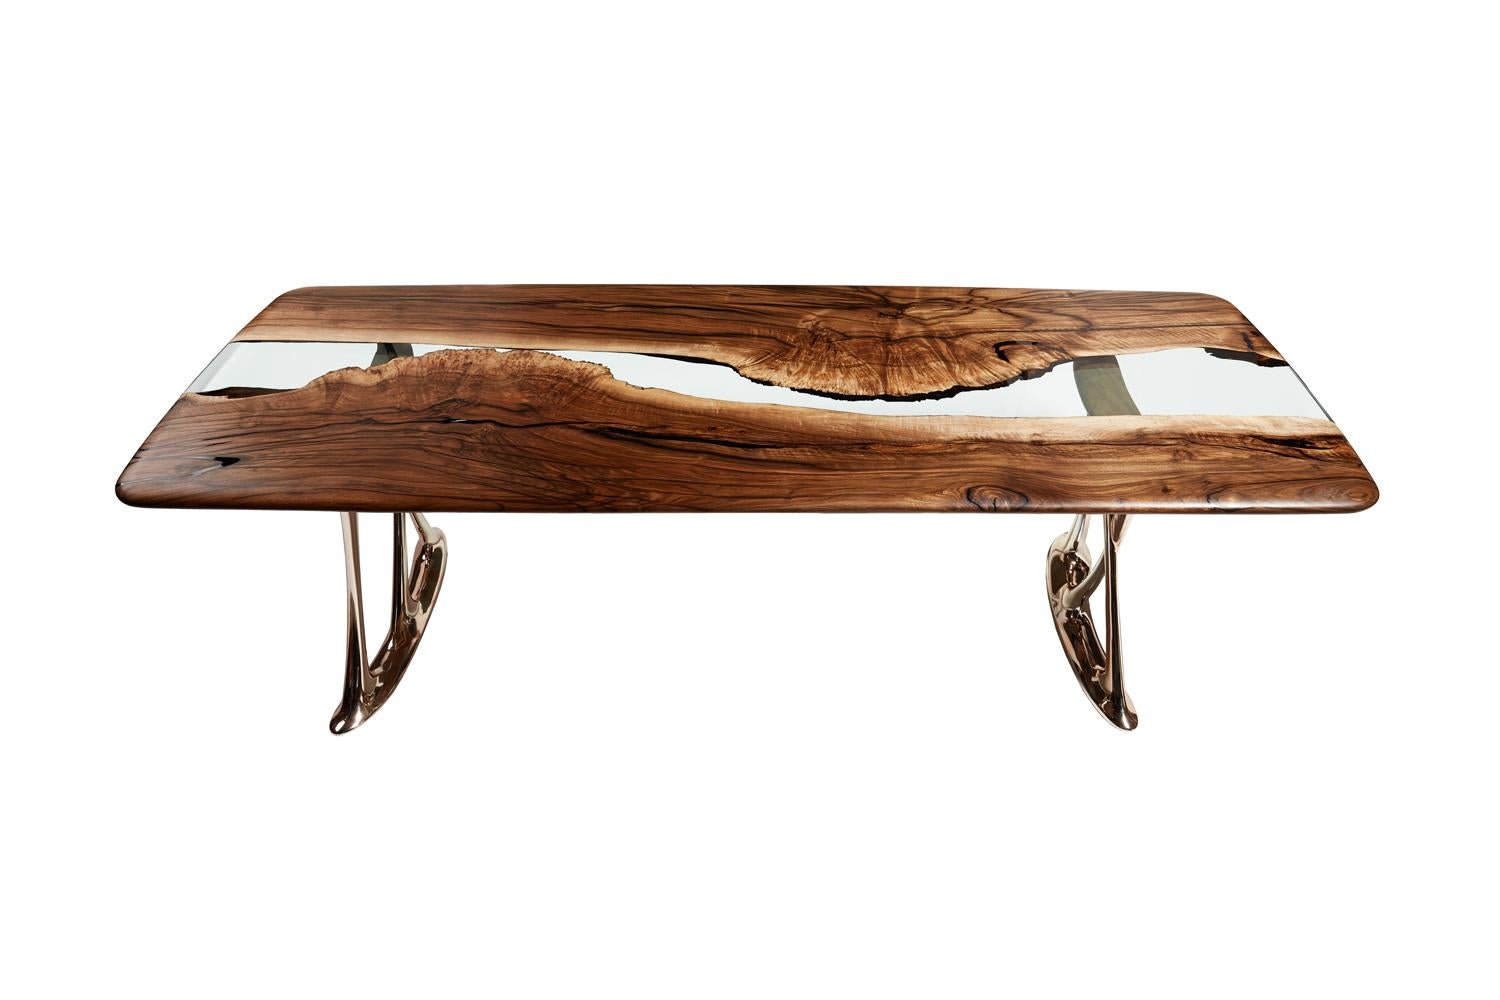 The ‘Osso 270' as made in Ankara, Turkey with walnut wood. The wood is kilned and dried prior to being filled with high-quality resin. The edges are rounded to perfection and have copper-colored aluminum legs.
 